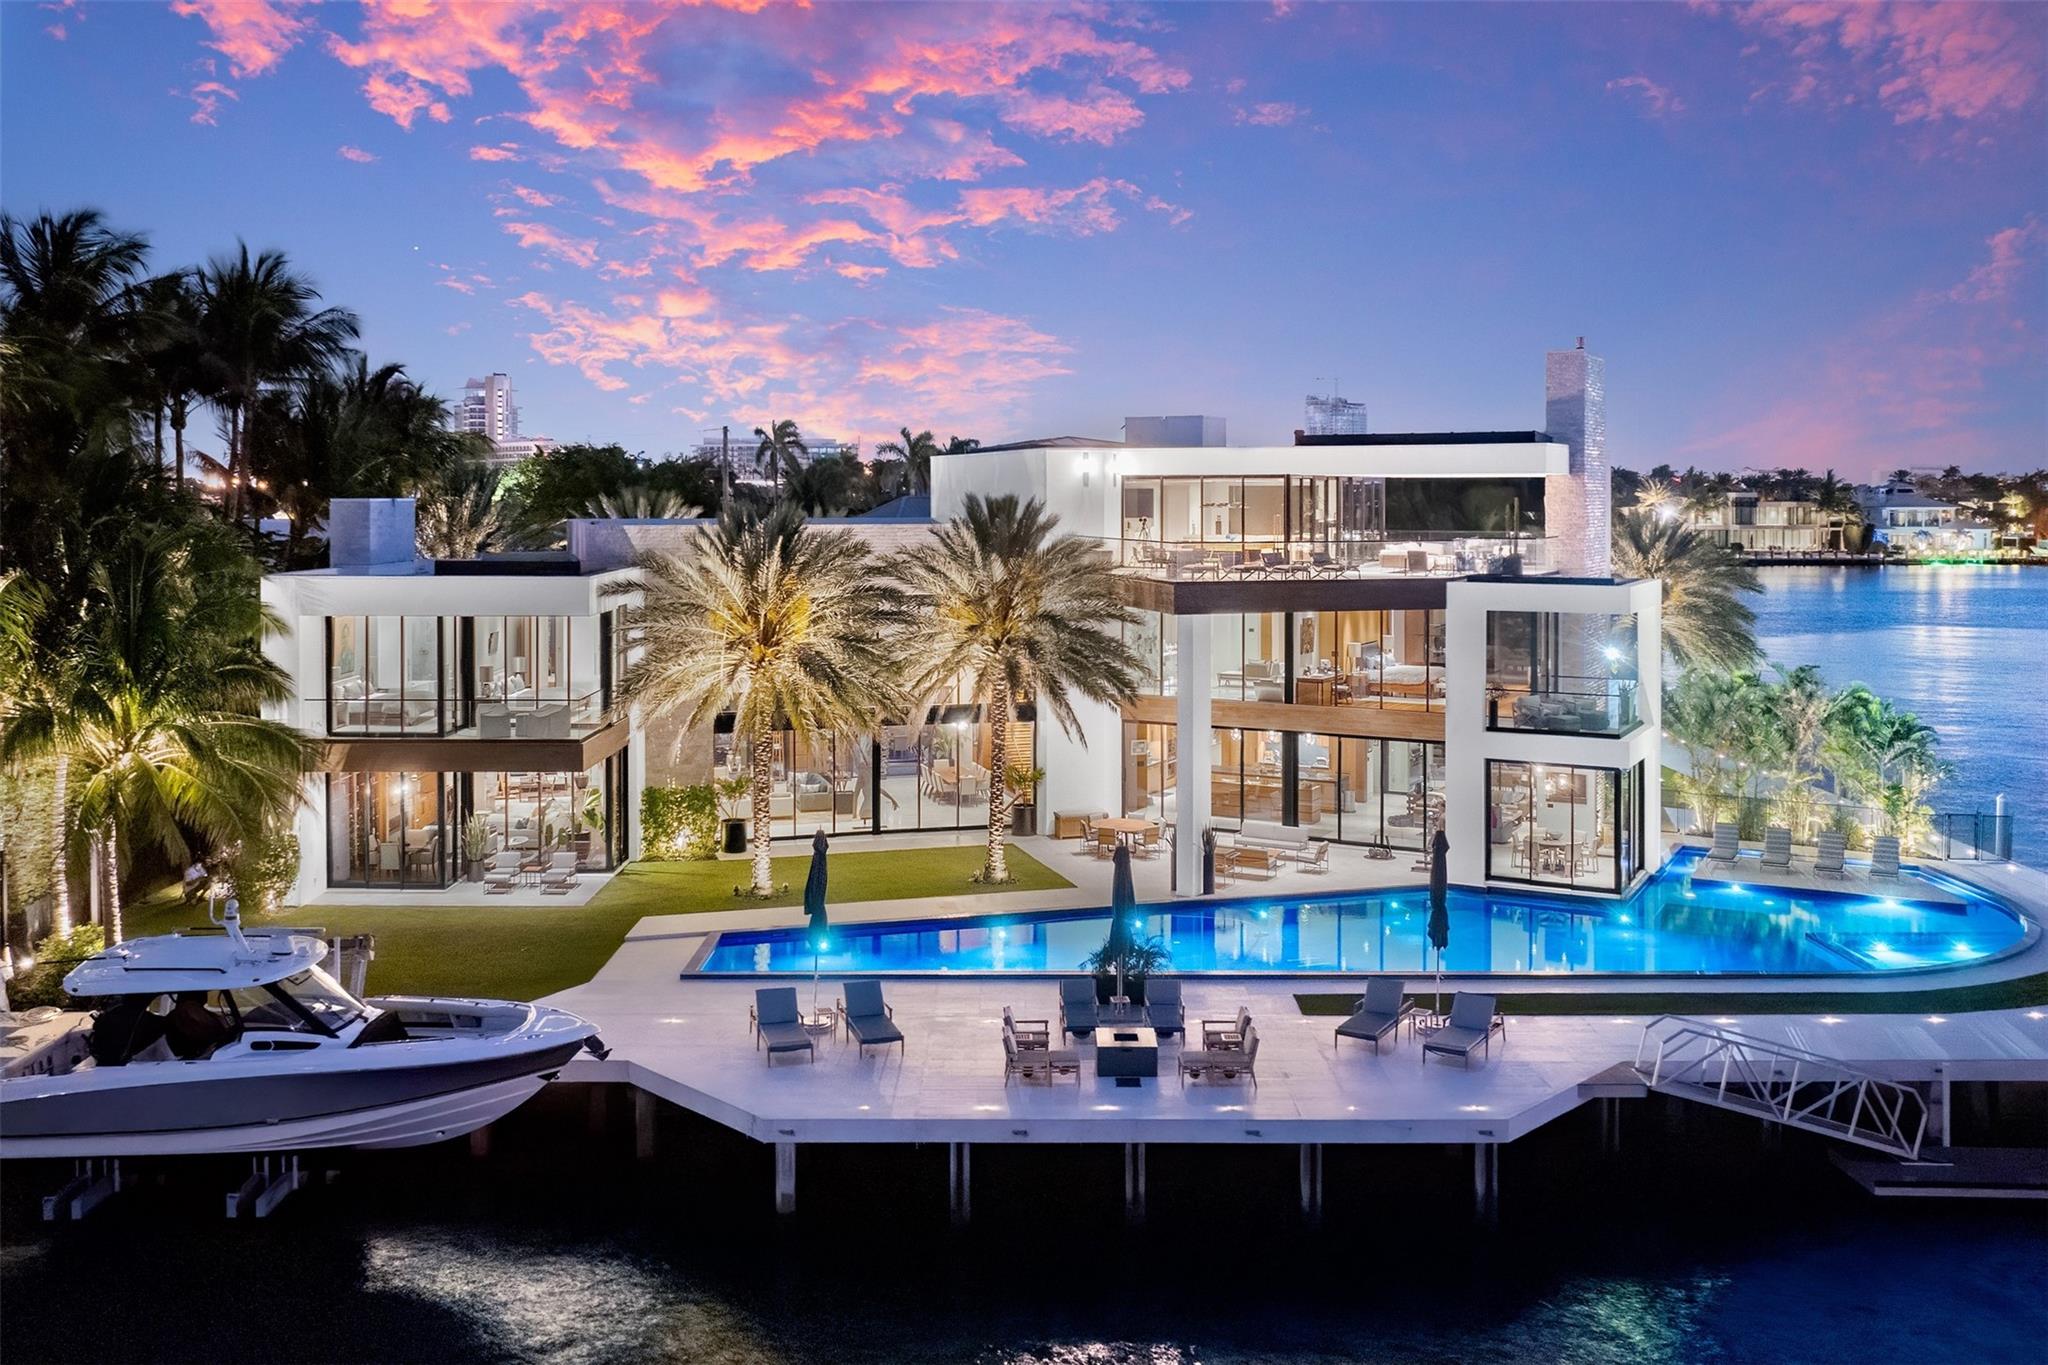 The epitome of ultra luxury living in prestigious Harbor Beach. With Intracoastal views & 298’ WF, this point lot estate offers a seamless blend of modern sophistication & timeless elegance. Find unparalleled lifestyle within w/ impeccable attention to detail & the highest quality materials/finishes throughout. Spanned across 3 floors, find luxury at every turn w/ marble & wood floors, state of the art security system, smart home capabilities & expansive third floor lounge w/the best views in the City. Voluminous ceilings, commercial grade elevator, 4 fireplaces, 6 wet bars & an astounding +/- 90’ lap pool are just some of the many amenities. Lounge by the infinity-edge pool, soak in the sun on the terrace, or embark on a sunset cruise from your private dock. The possibilities are endless.